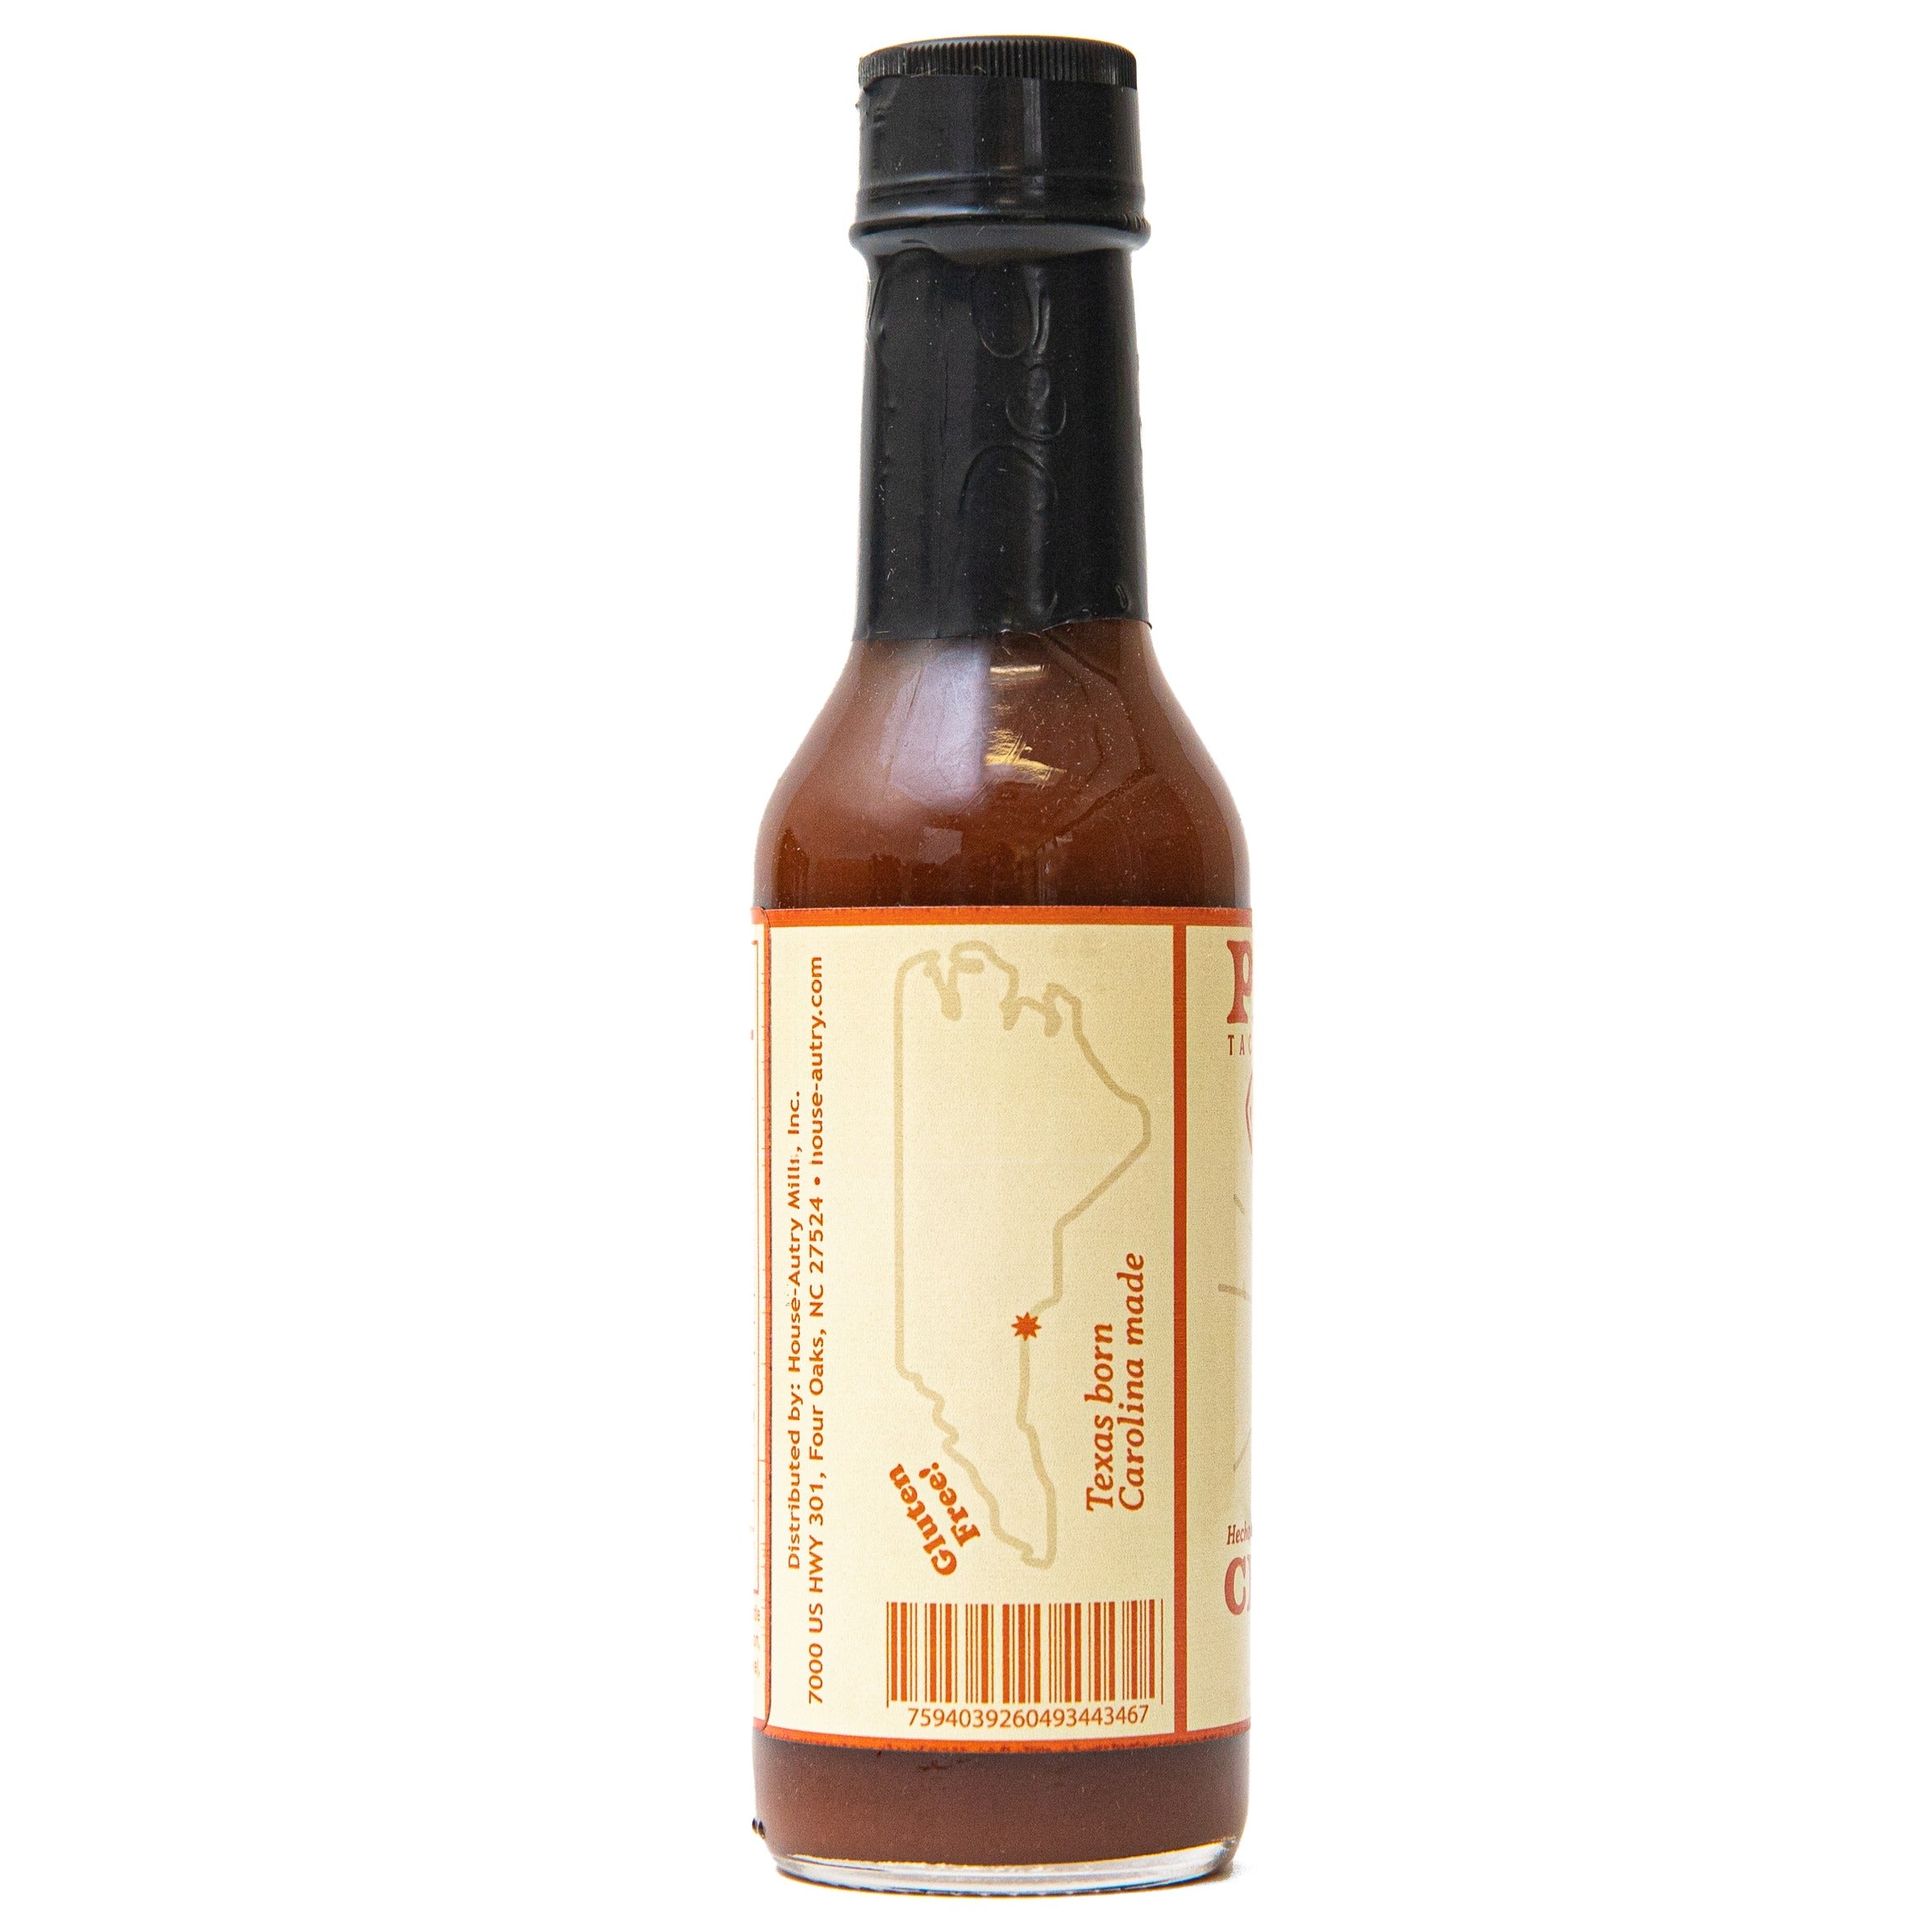 Paco's Chipotle Sauce